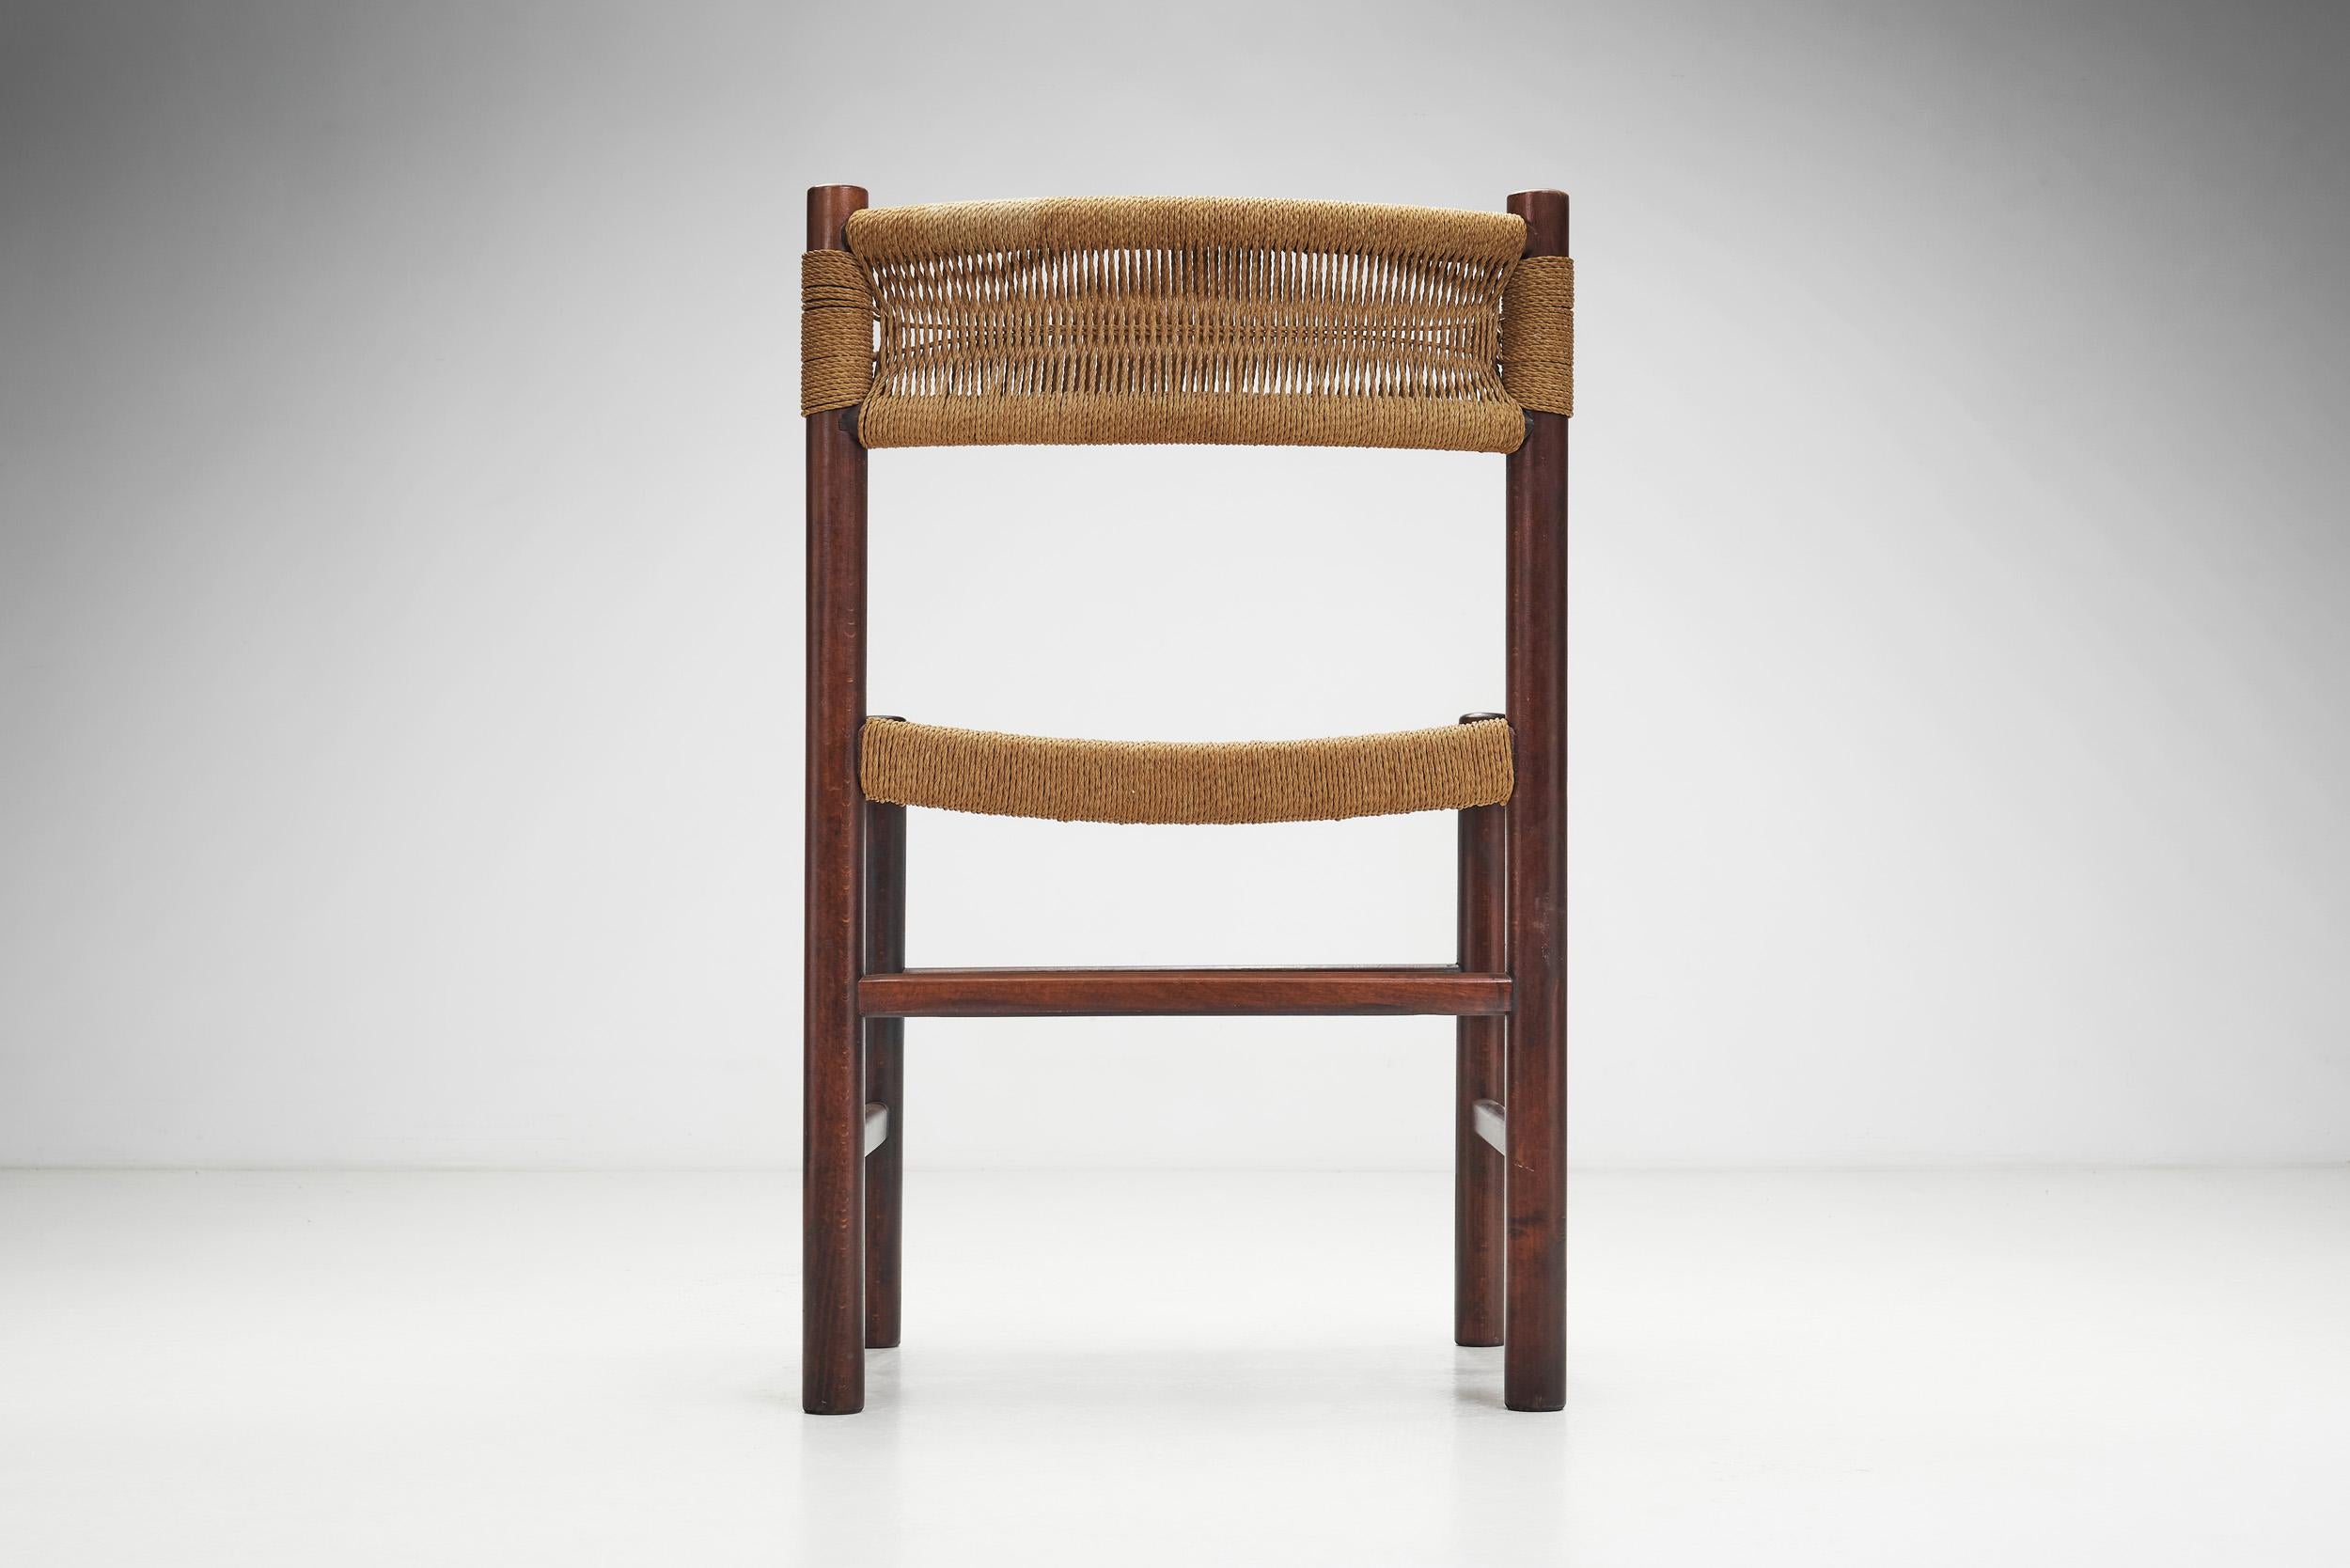 “Dordogne” Style Chair with Woven Papercord Seat and Back, Europe ca 1960s For Sale 1